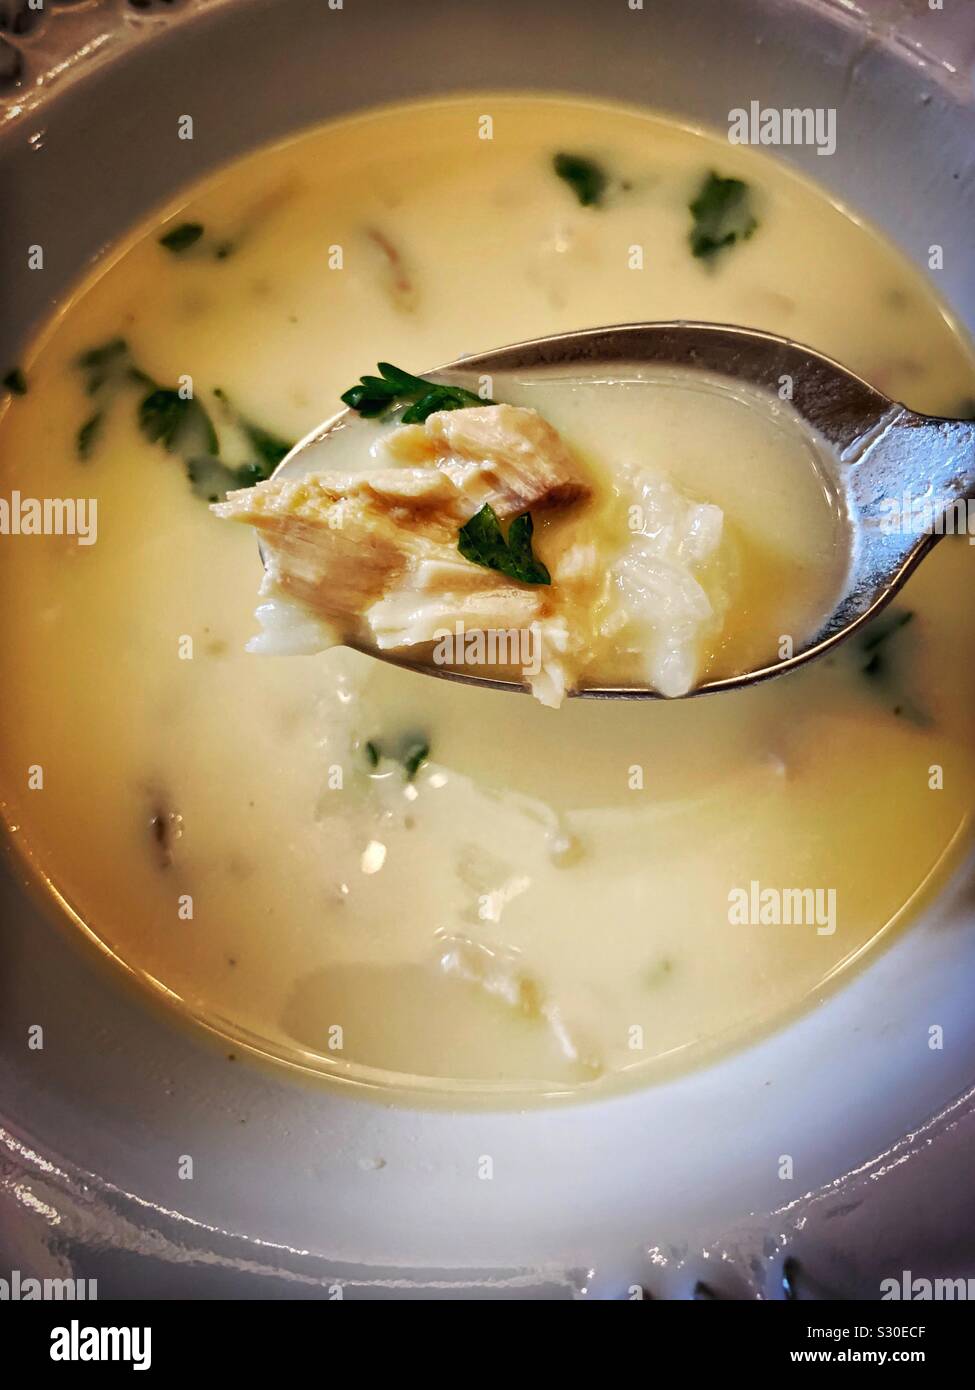 A spoon filled with creamy Greek-style Avgolemono is pictured over the bowl of this delicious soup made from leftover turkey after Thanksgiving. Stock Photo